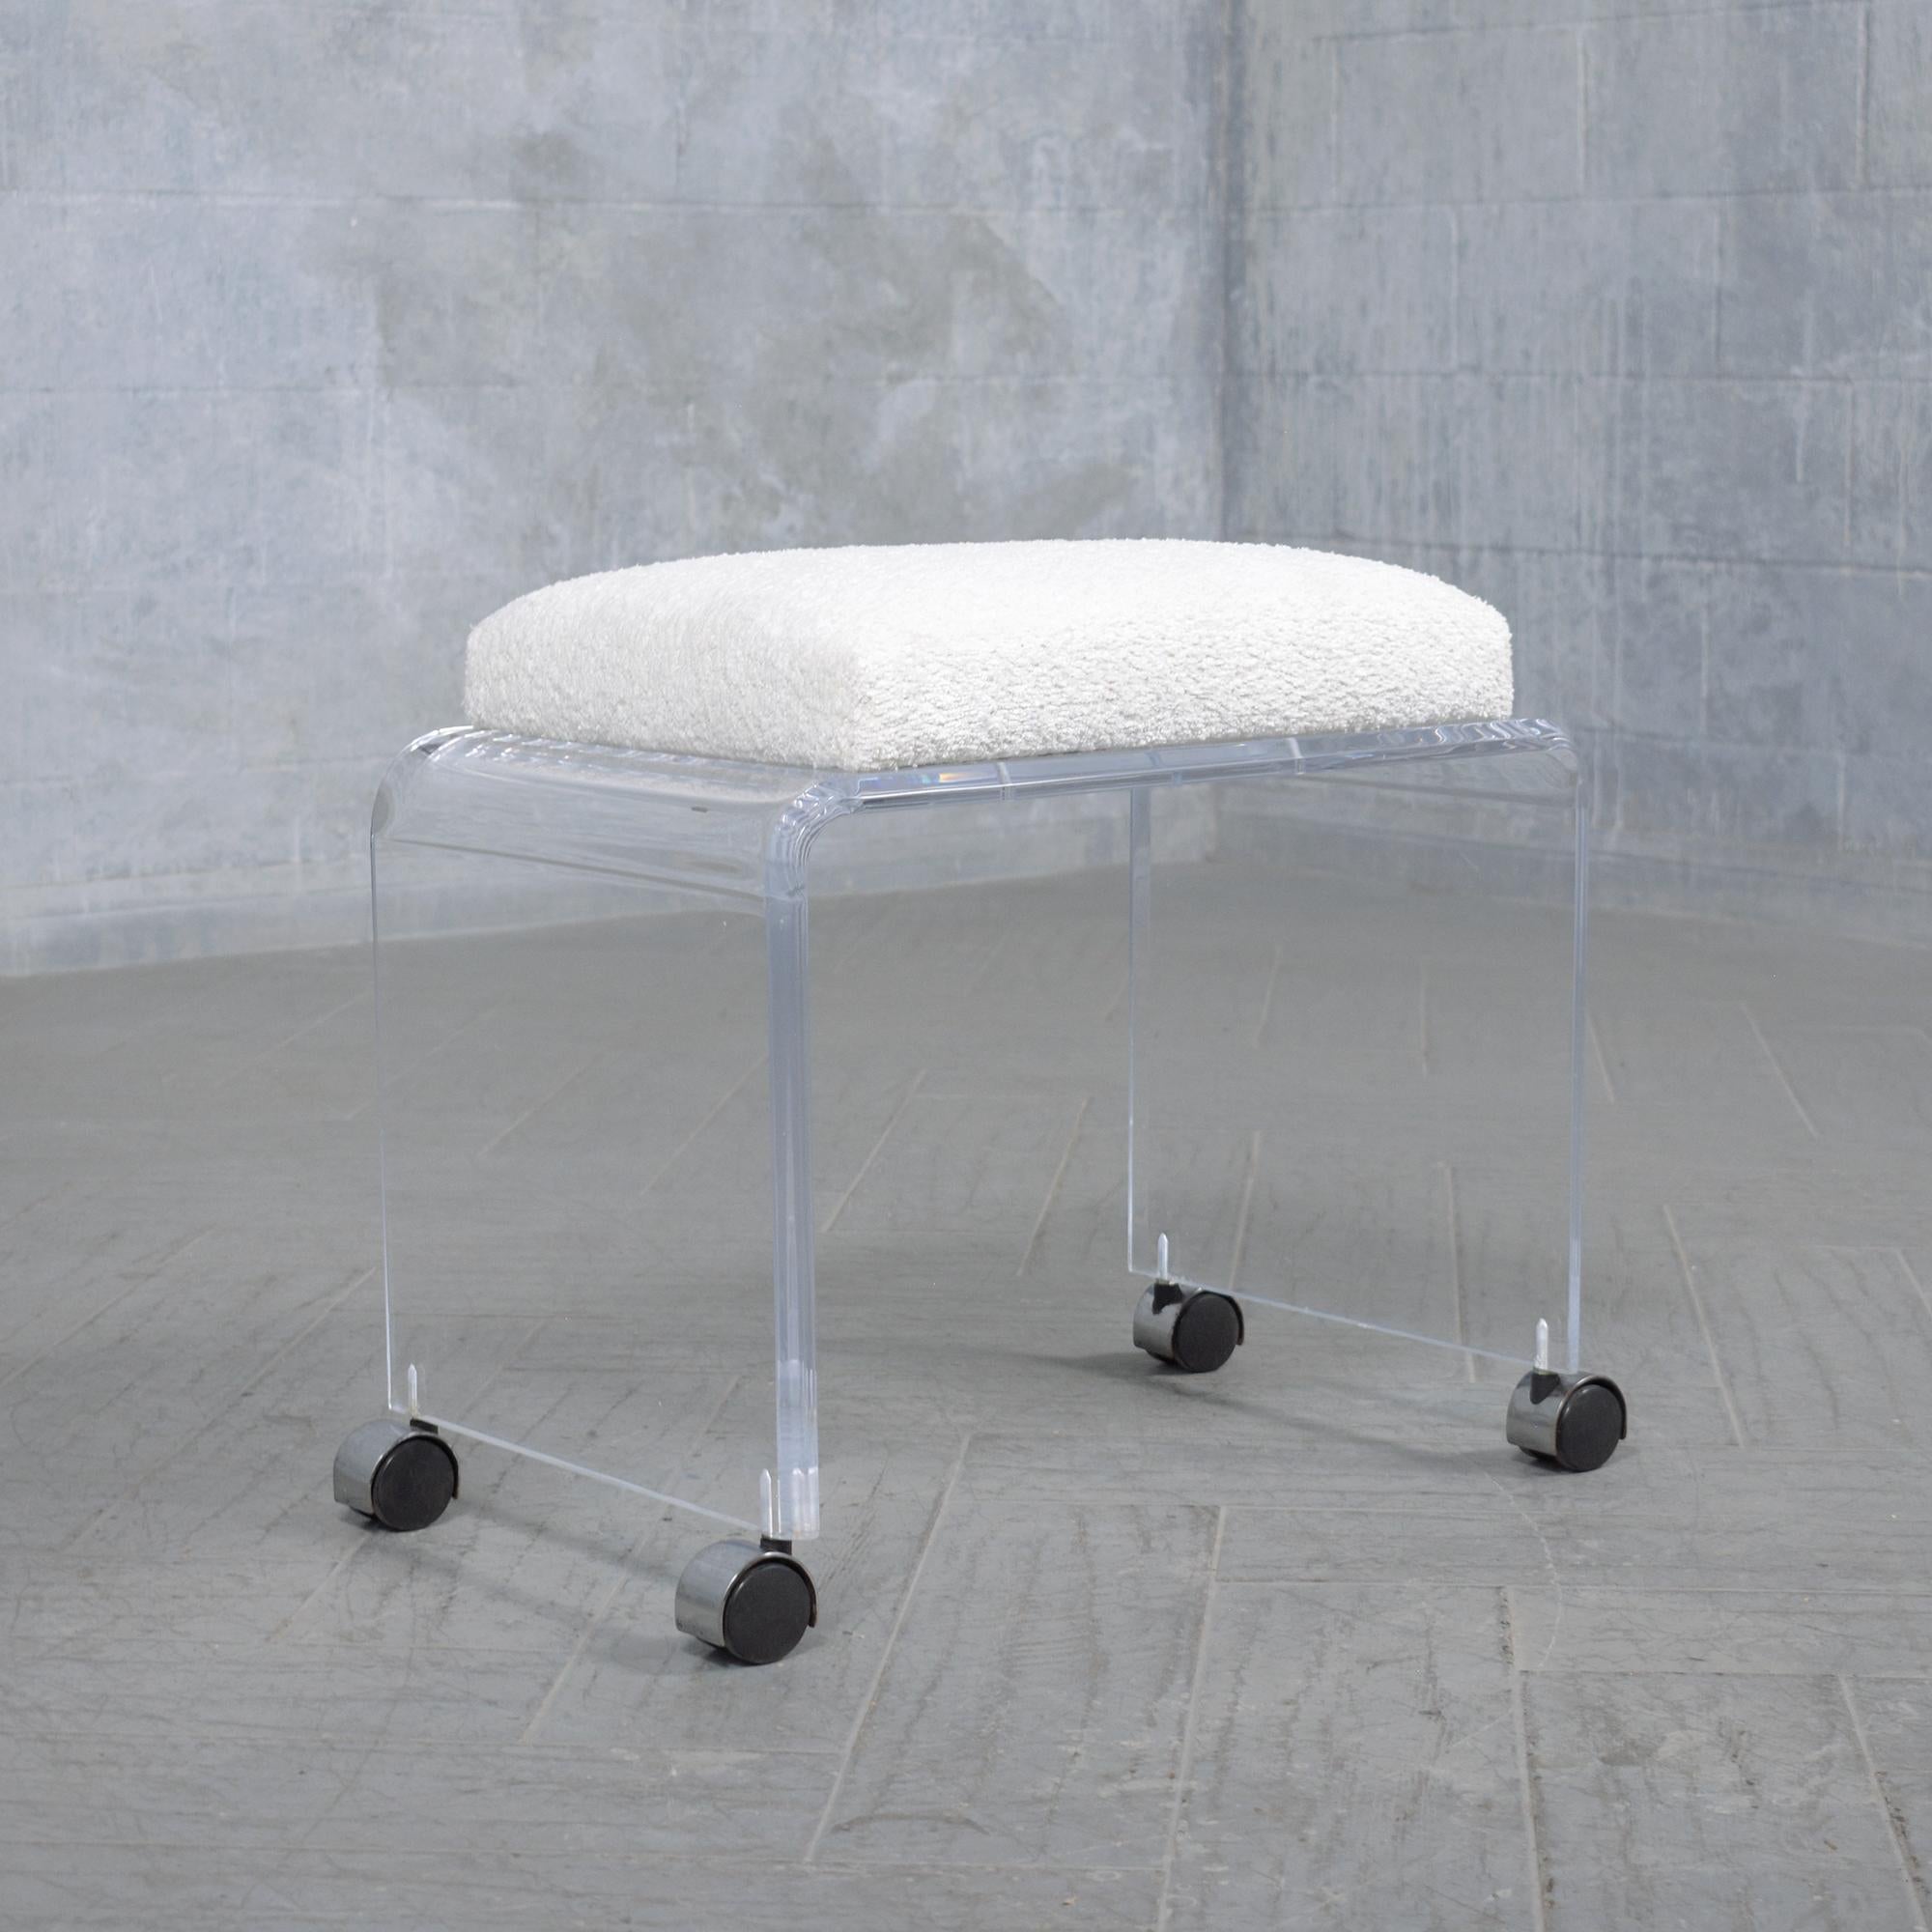 Mid-20th Century Lucite Waterfall Bench: A Fusion of Mid-Century Elegance & Modern Style For Sale